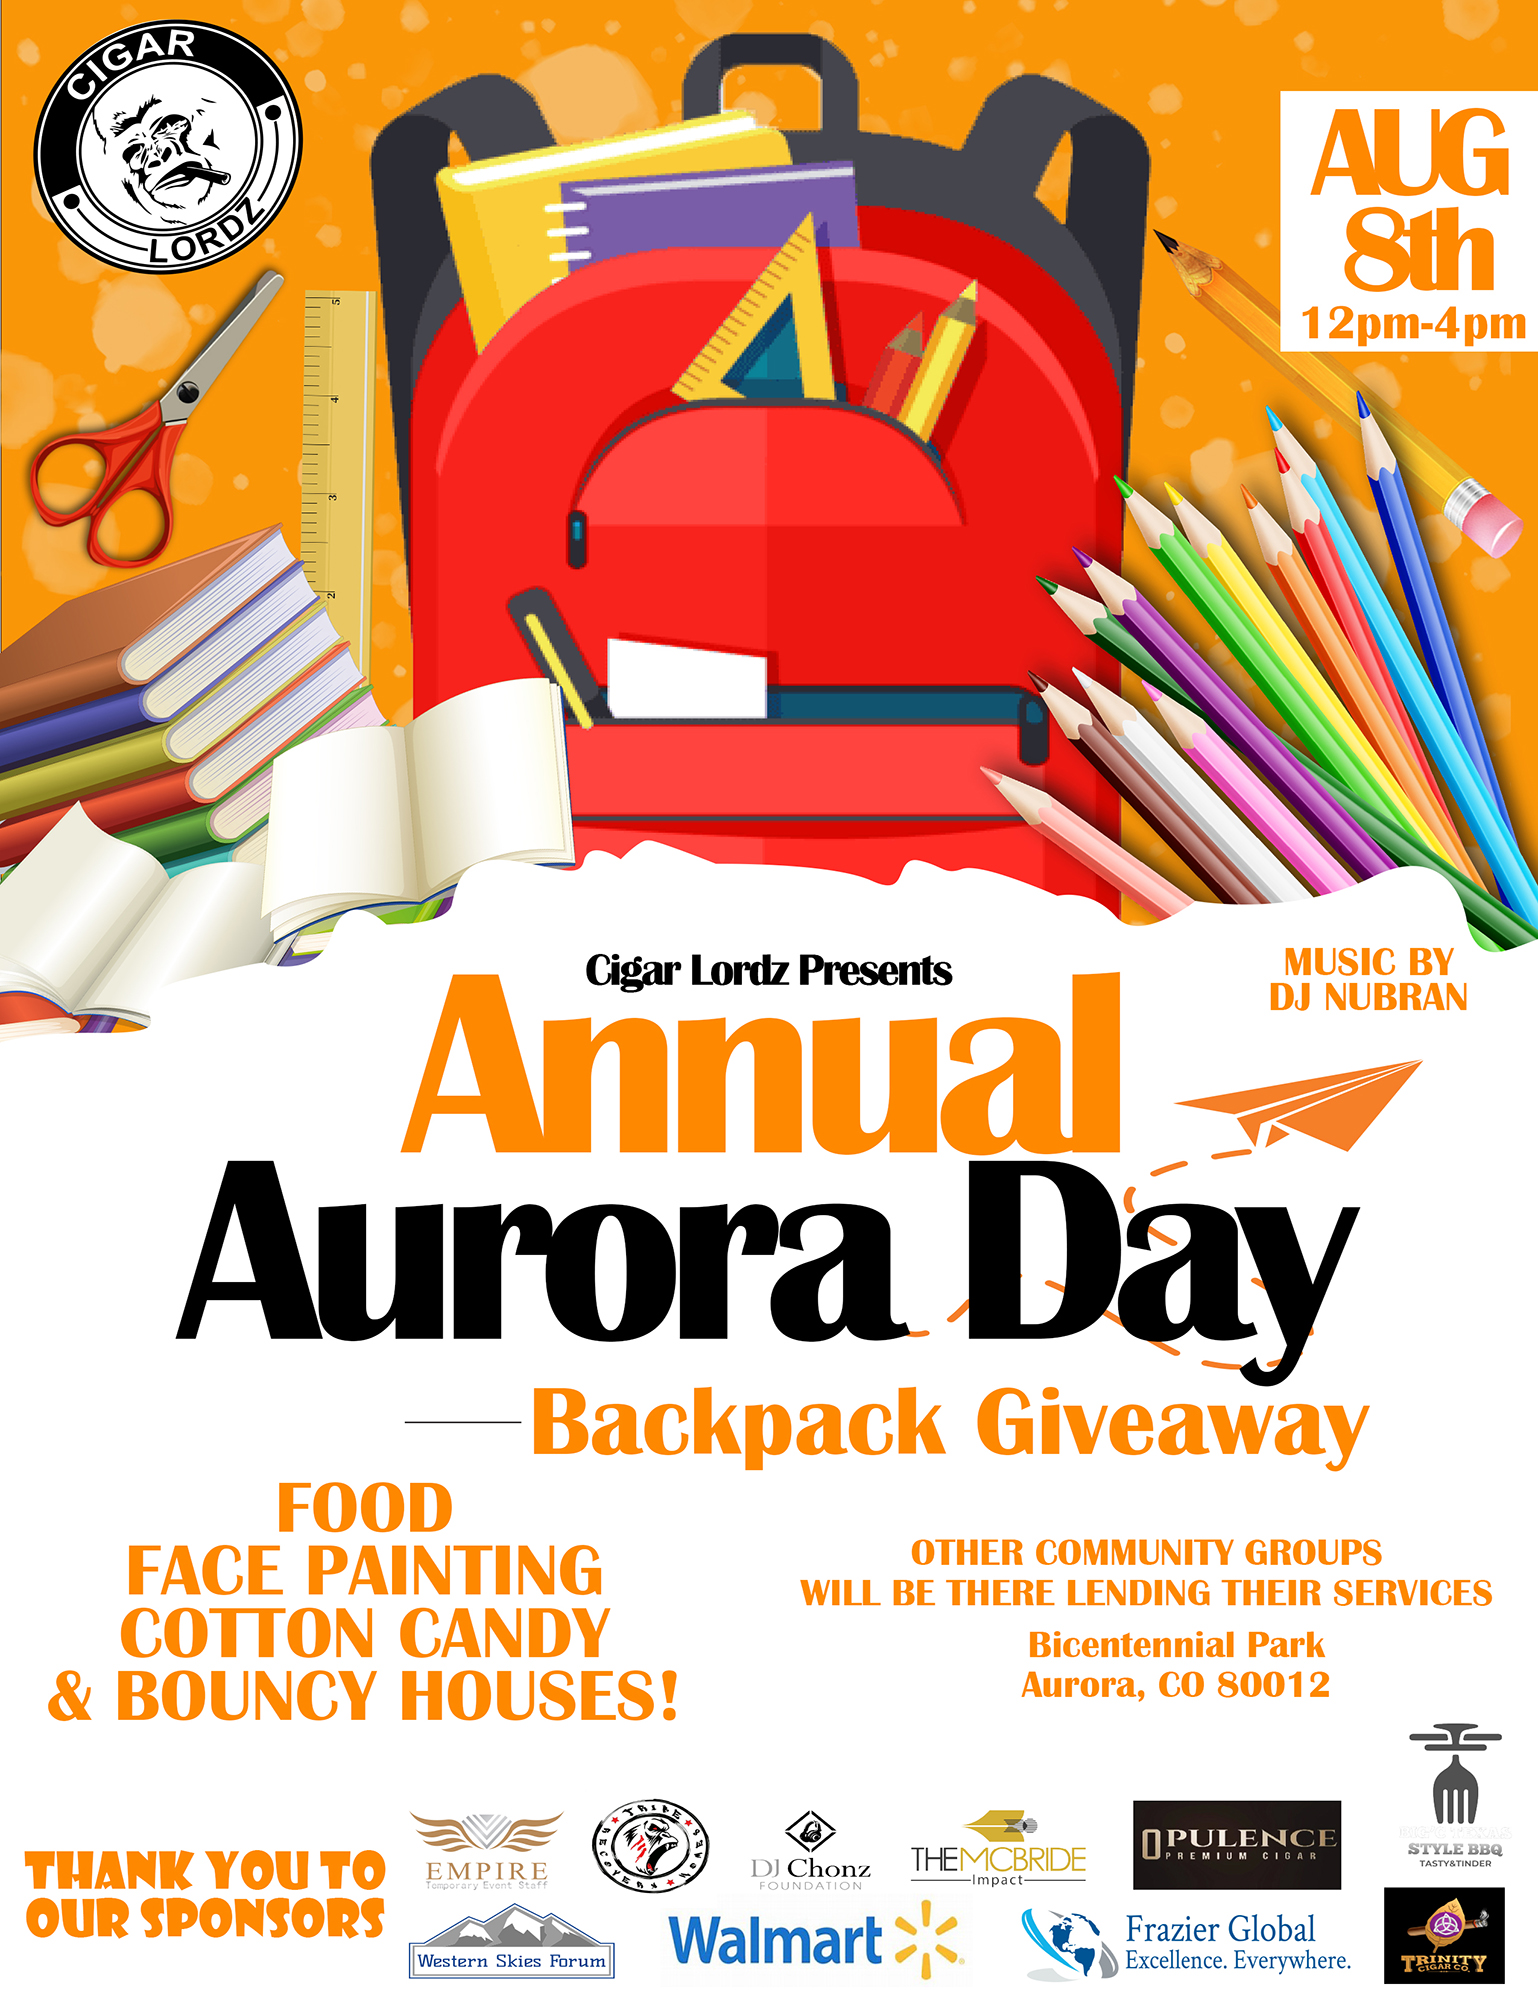 Annual Aurora Day Backpack Giveaway THE DROP